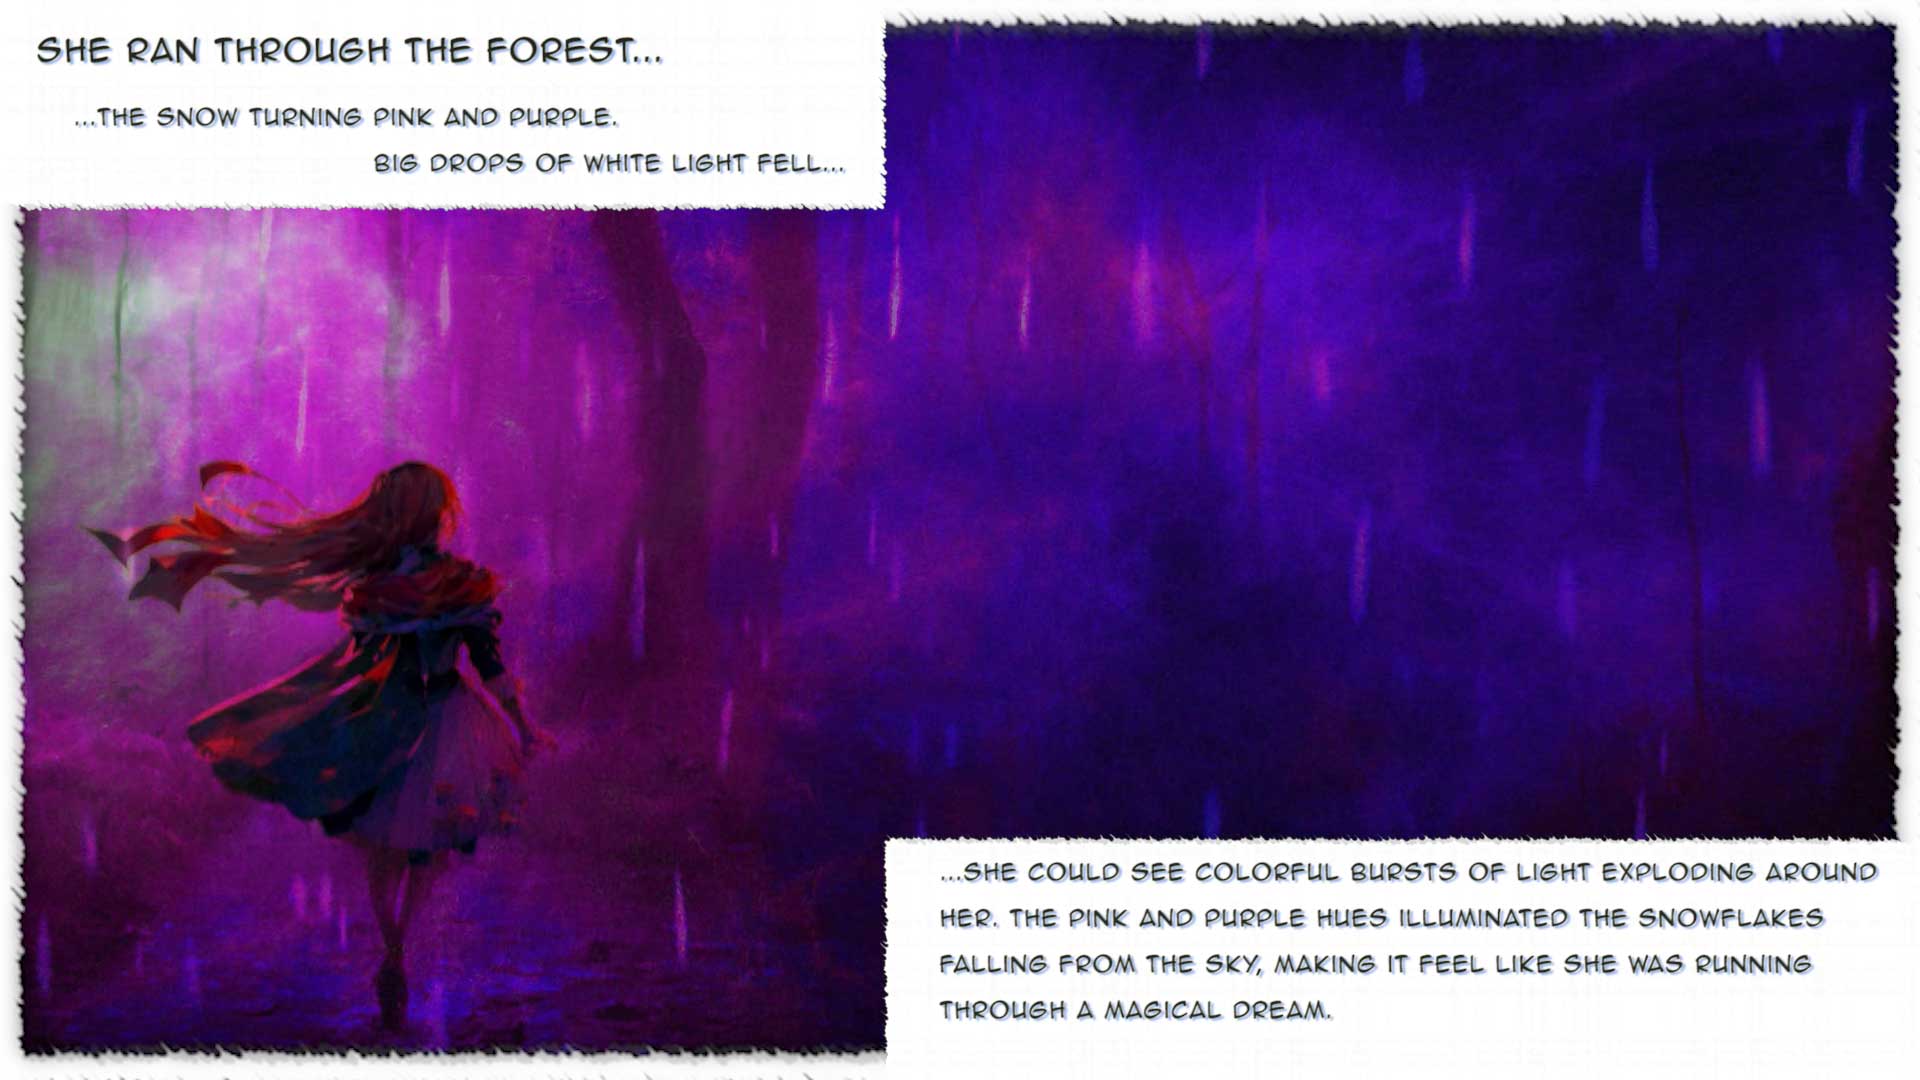 She ran through the forest...
...the snow turning pink and purple. 
			Big drops of white light fell...

...she could see colorful bursts of light exploding around her. The pink and purple hues illuminated the snowflakes falling from the sky, making it feel like she was running through a magical dream.